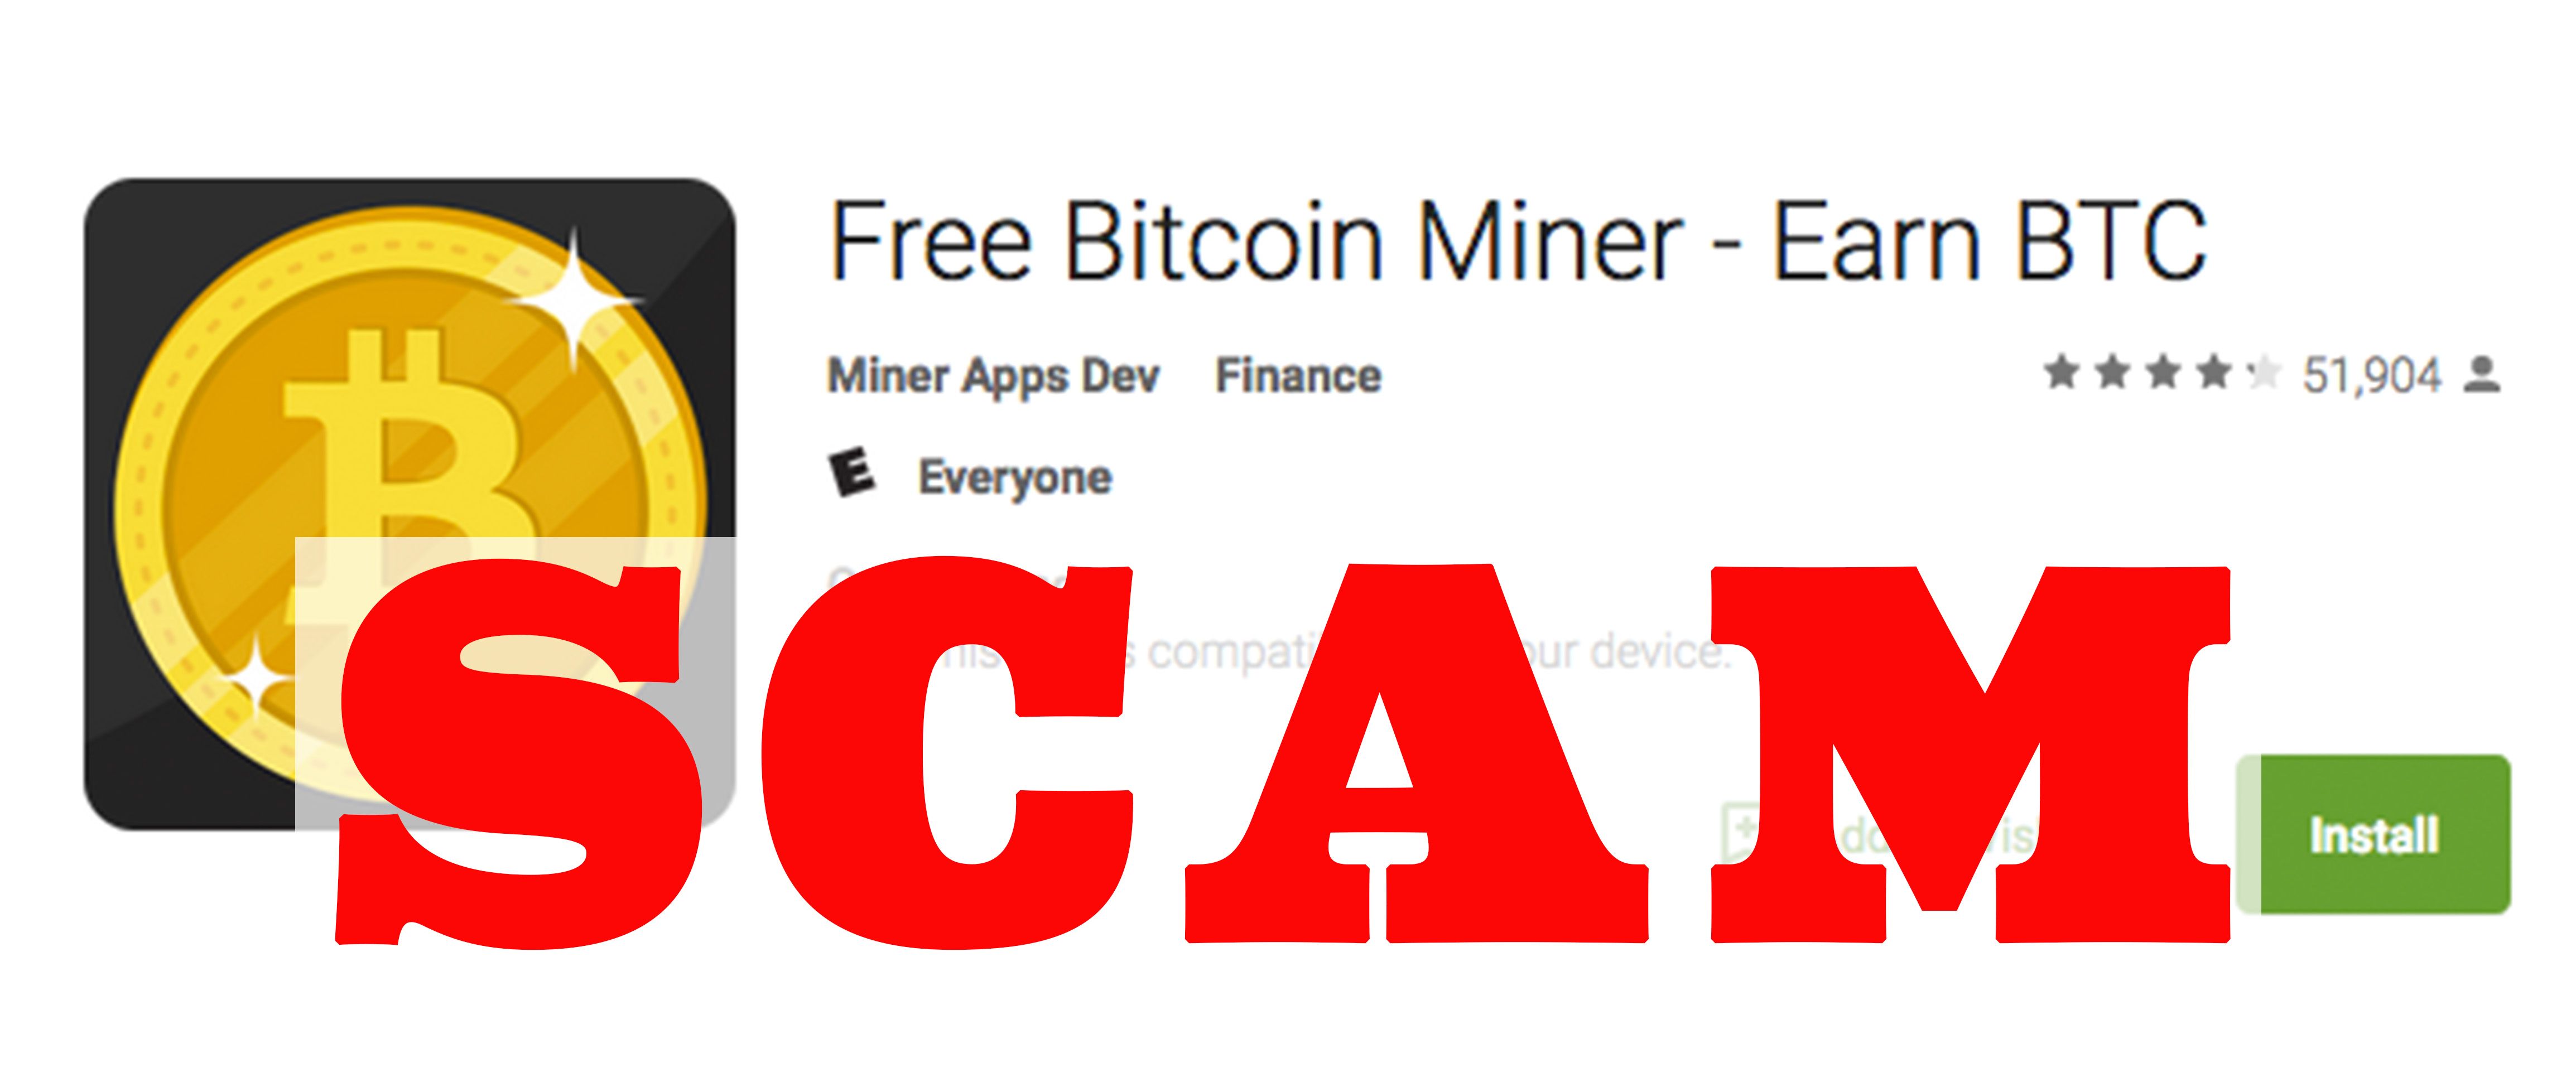 free bitcoin miner android app